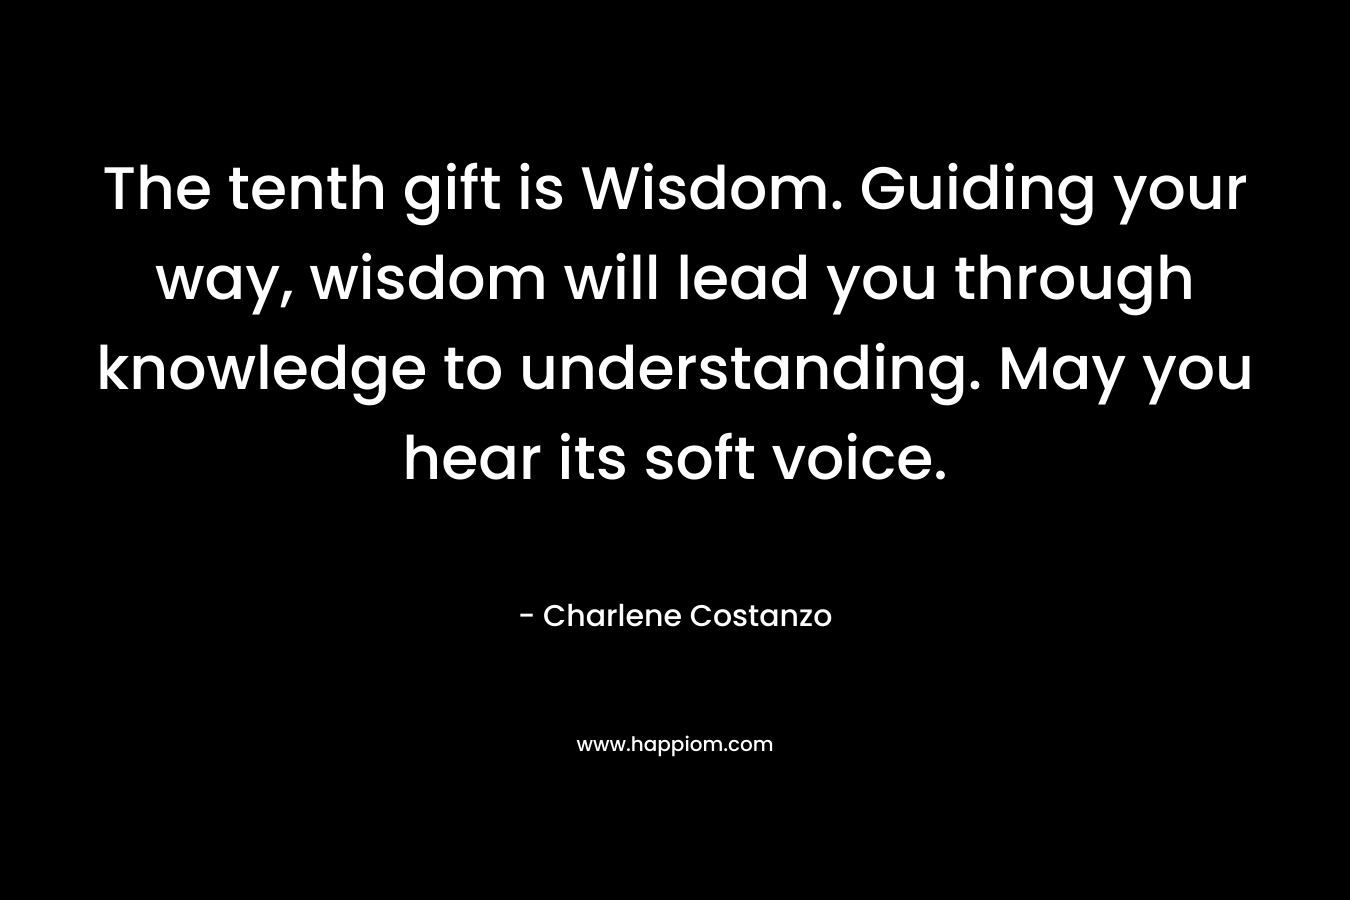 The tenth gift is Wisdom. Guiding your way, wisdom will lead you through knowledge to understanding. May you hear its soft voice. – Charlene Costanzo